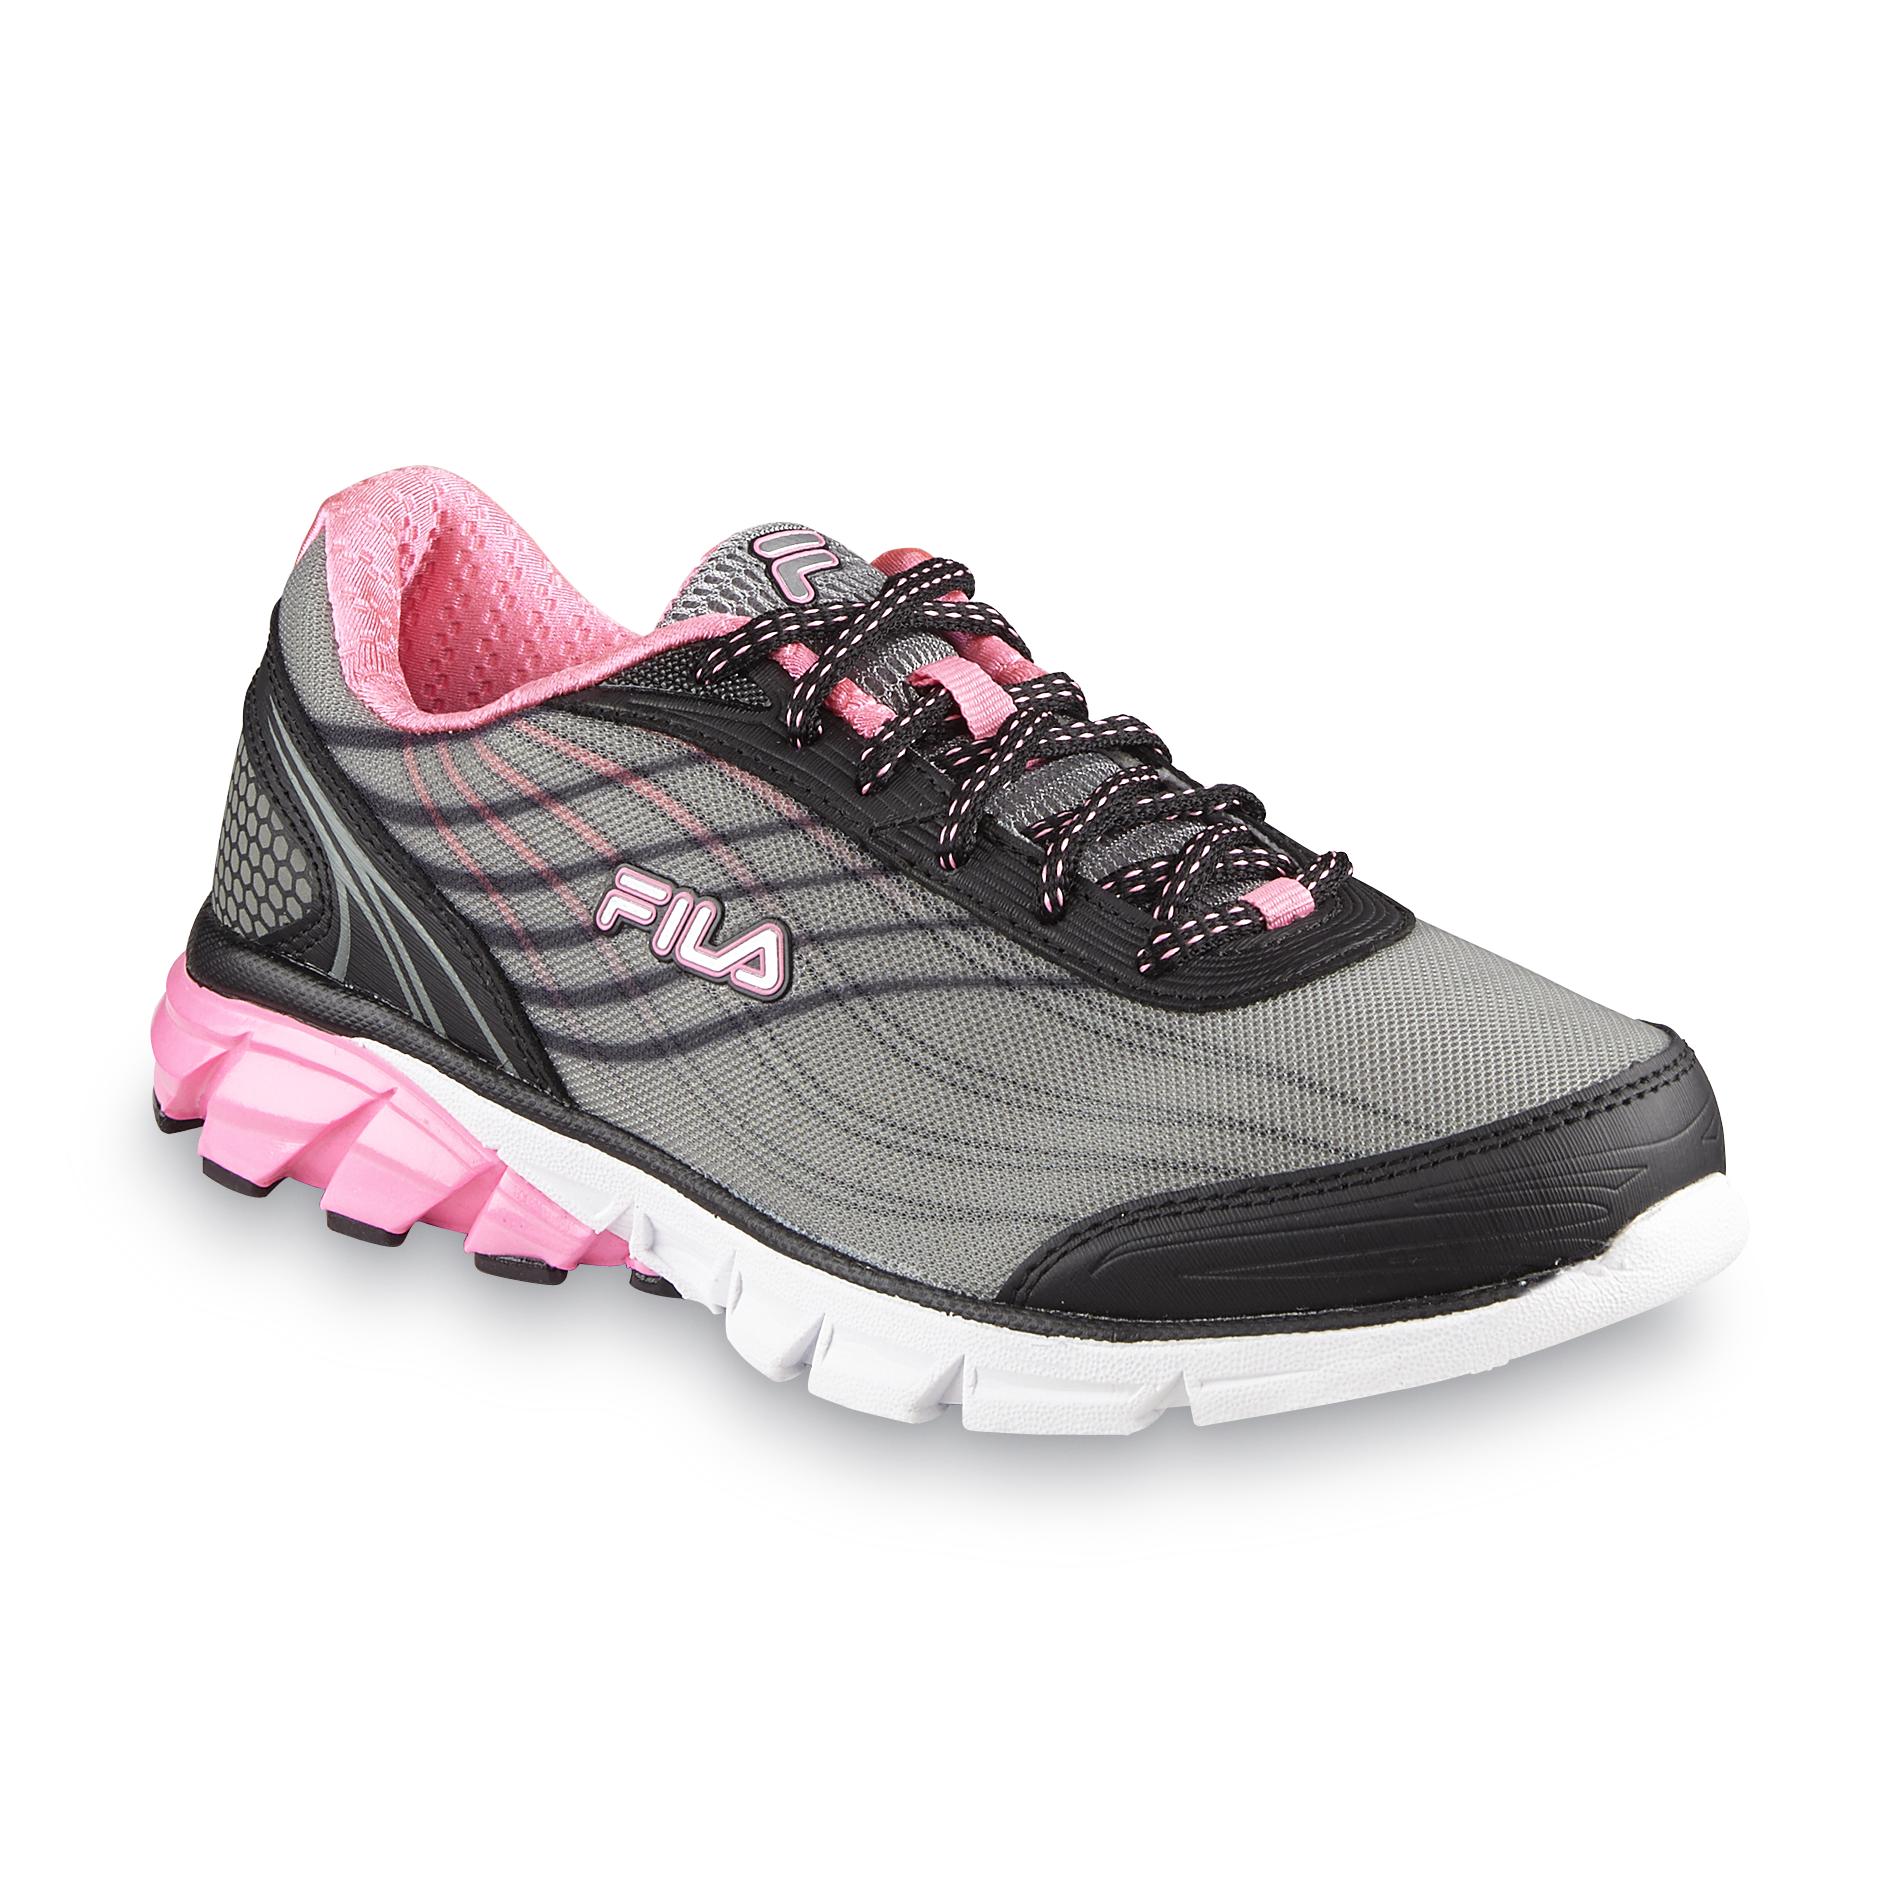 Fila Women's Head of the Pack Energized Athletic Shoe - Gray/Pink